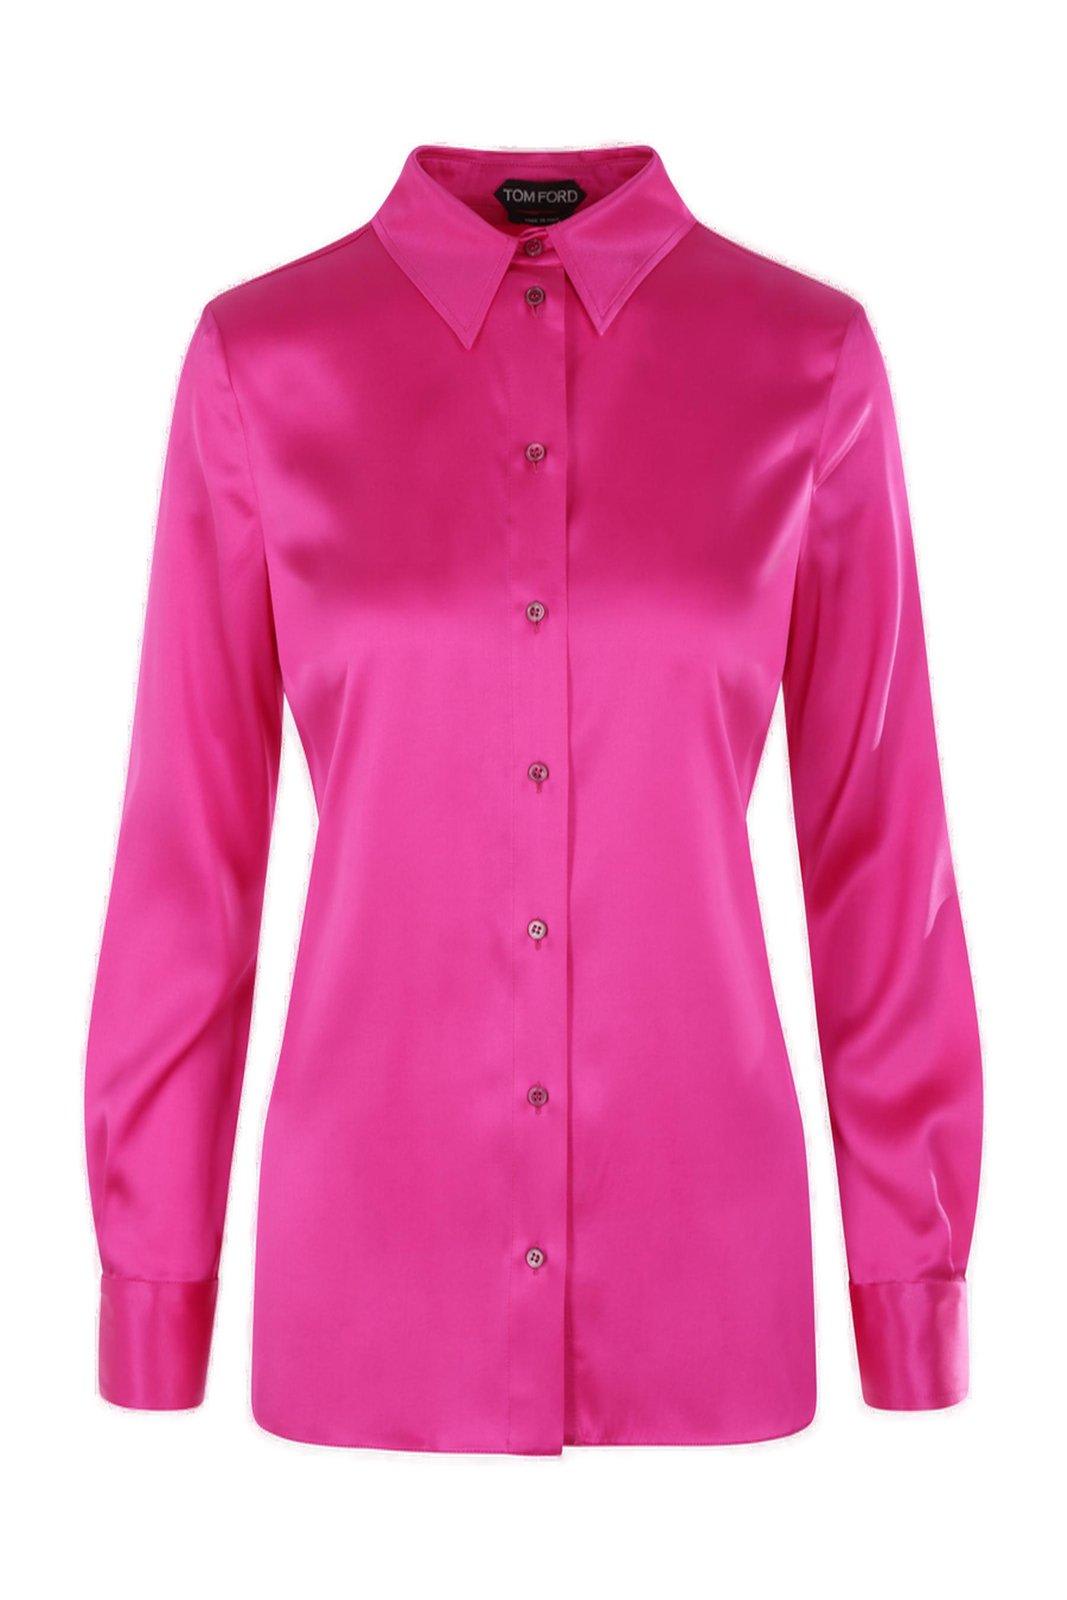 TOM FORD BUTTONED LONG-SLEEVED SHIRT